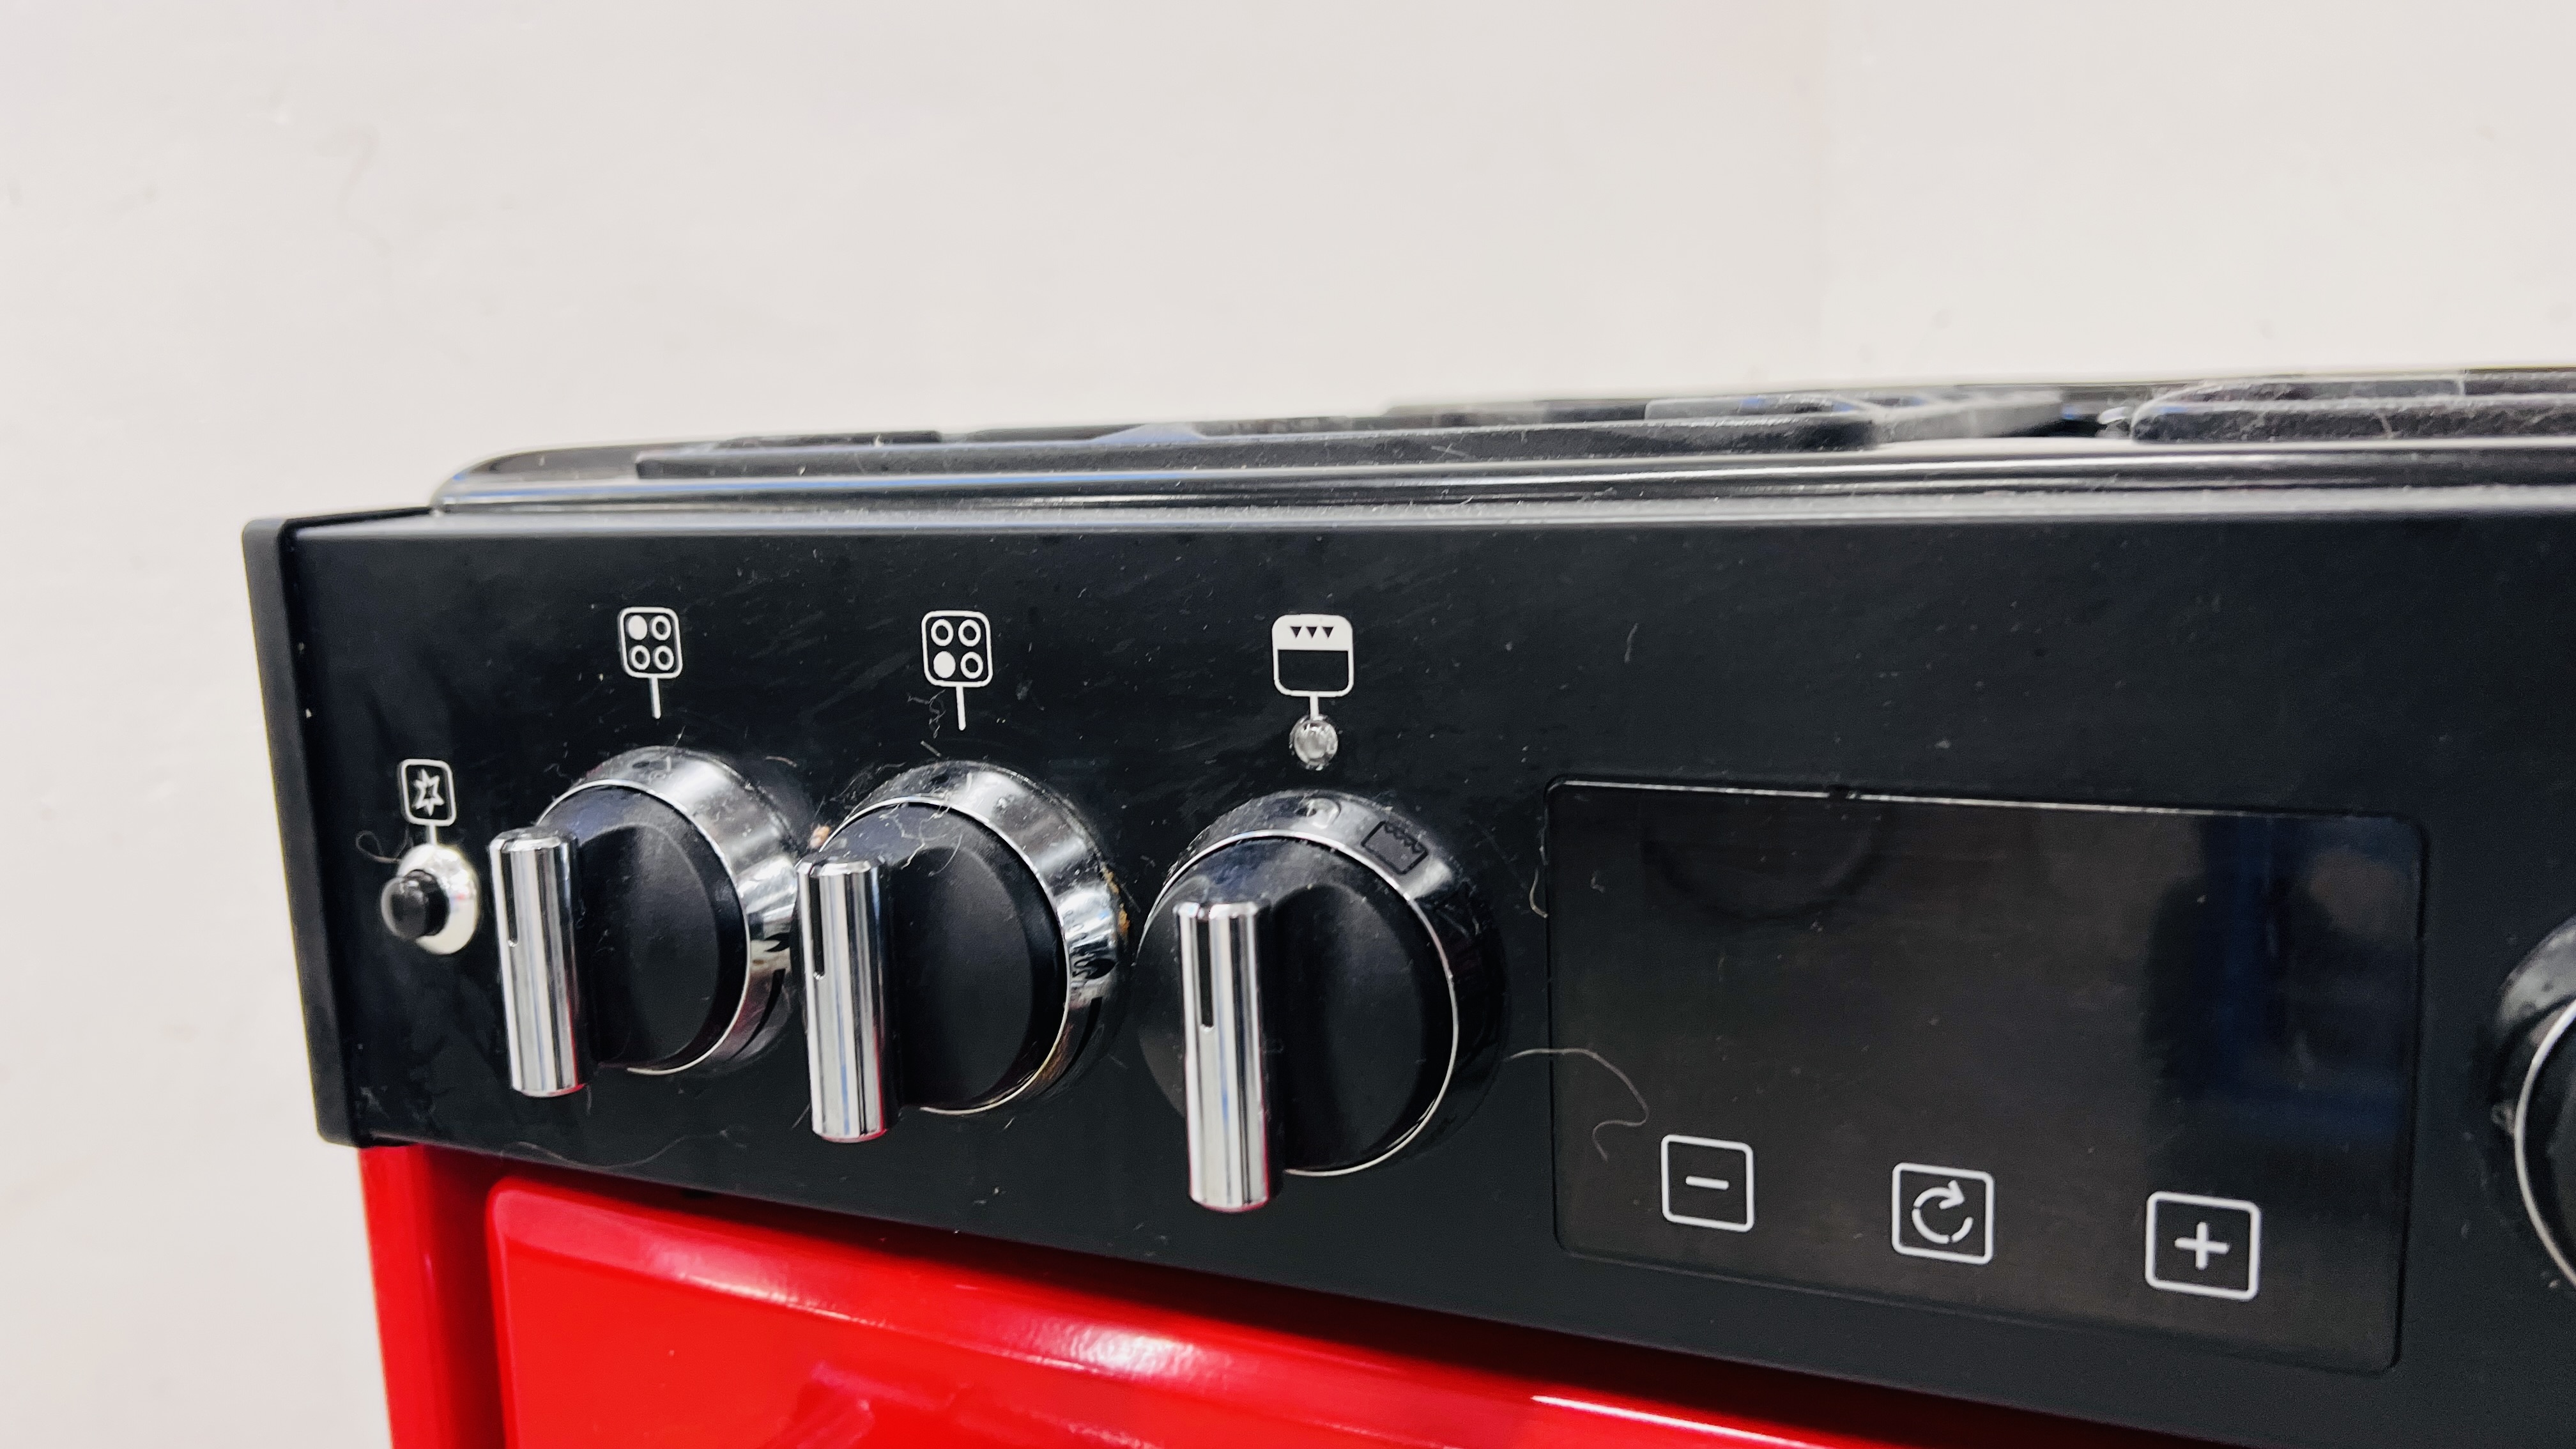 A BELLING "FARMHOUSE" MAINS GAS HOB, ELECTRIC SLOT IN COOKER FINISHED IN "HOT JALAPENO" RED, - Image 5 of 11